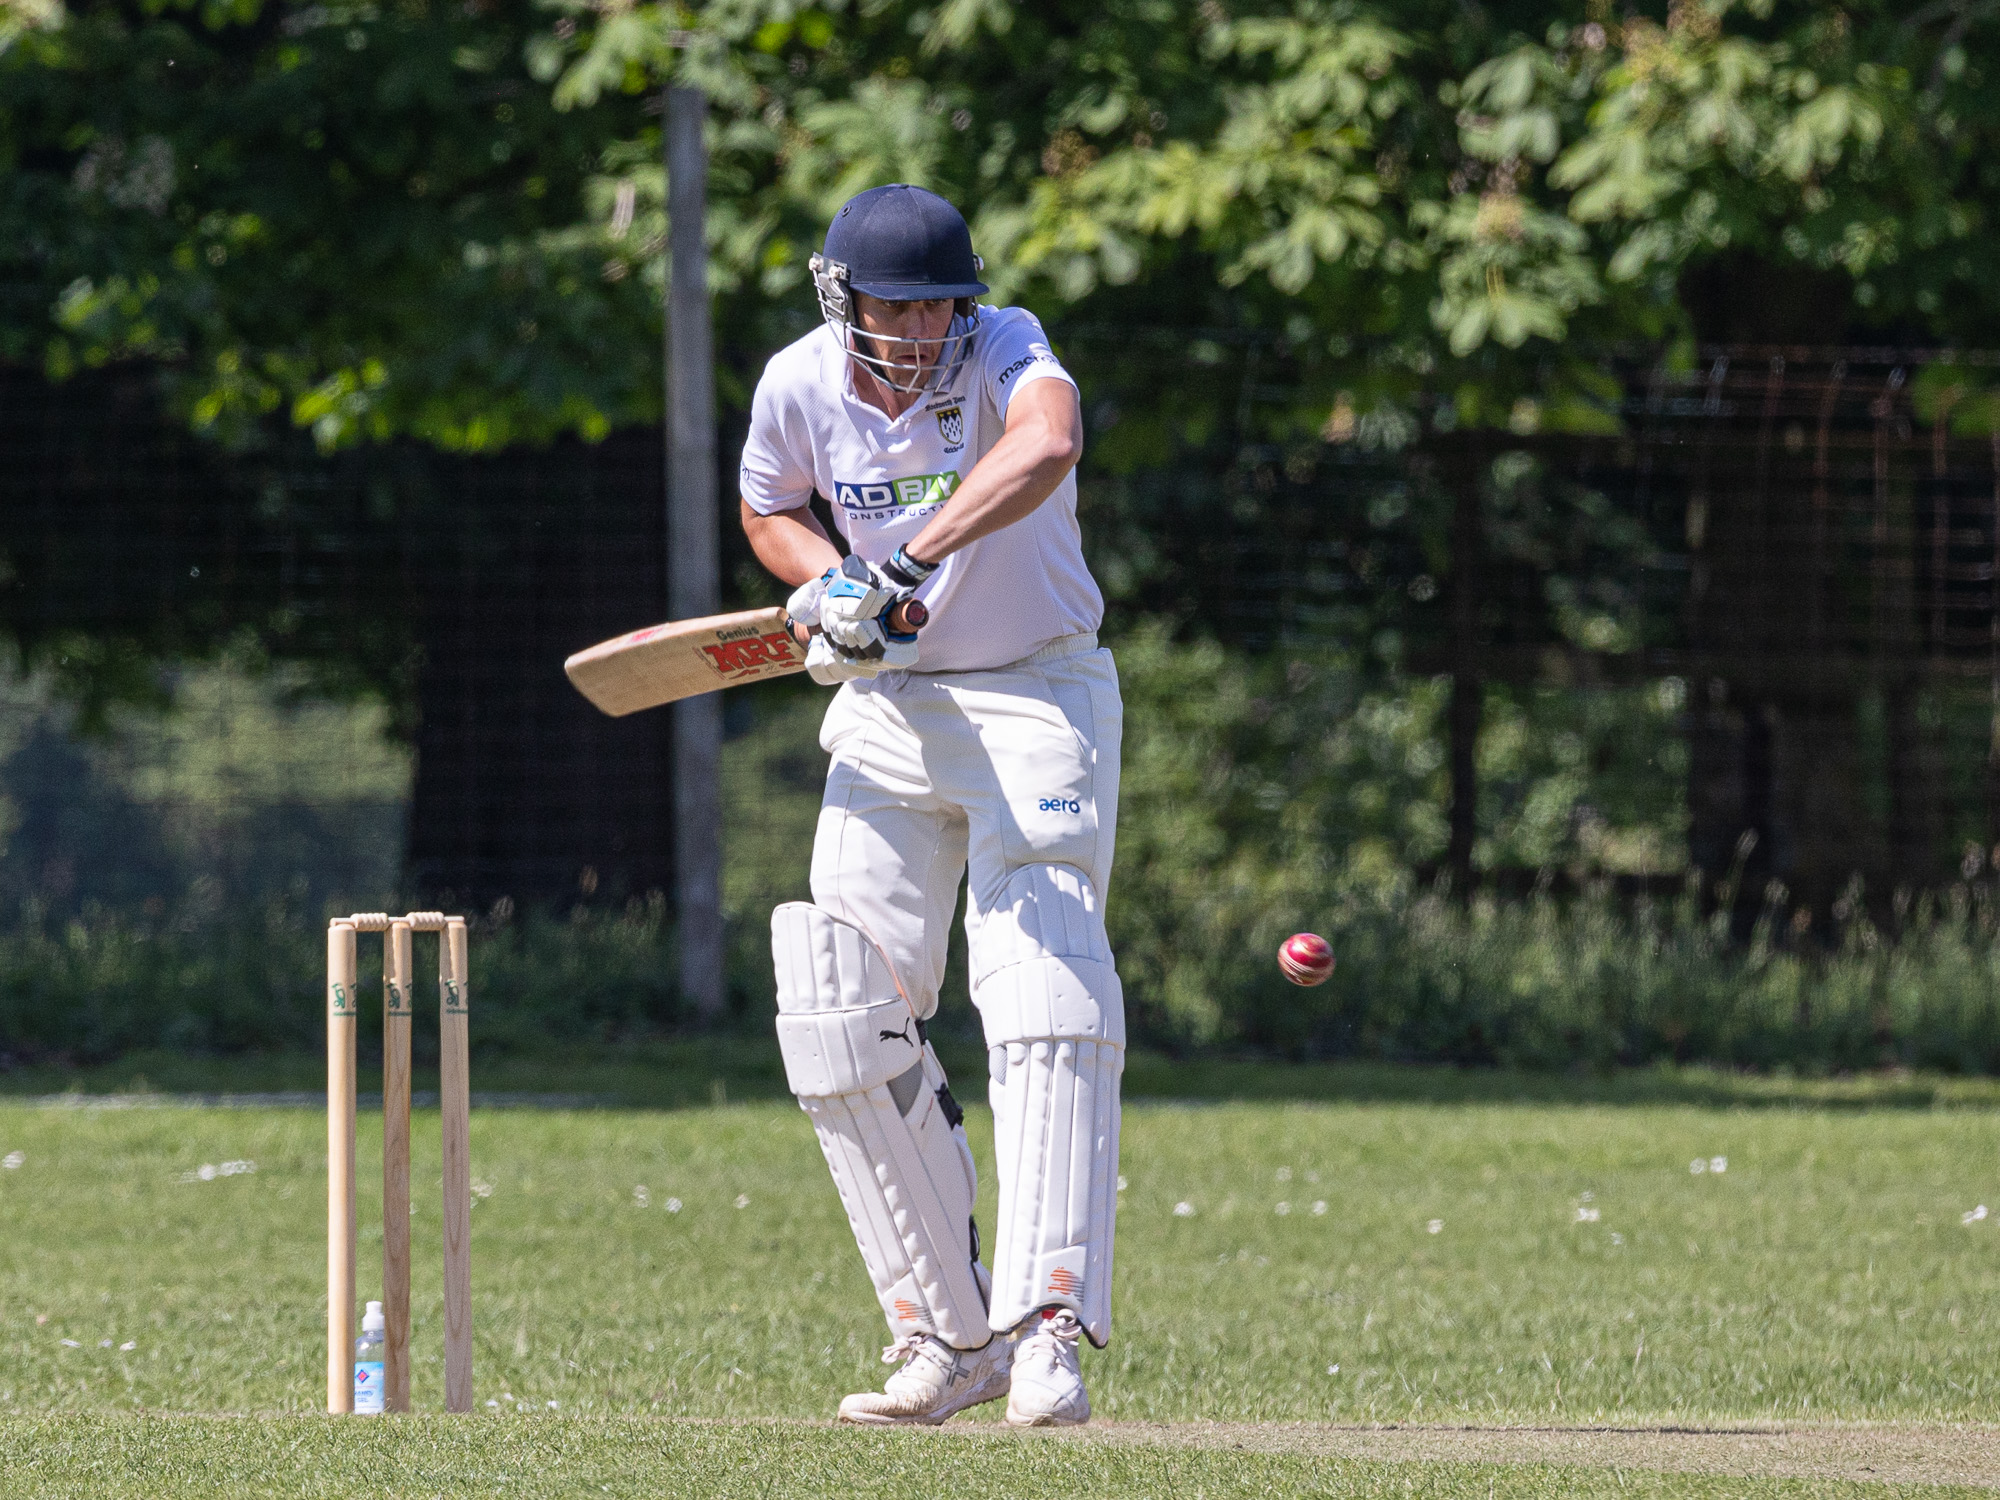 We continue to sponsor Knebworth Cricket Club & Steeple Morden Magpies